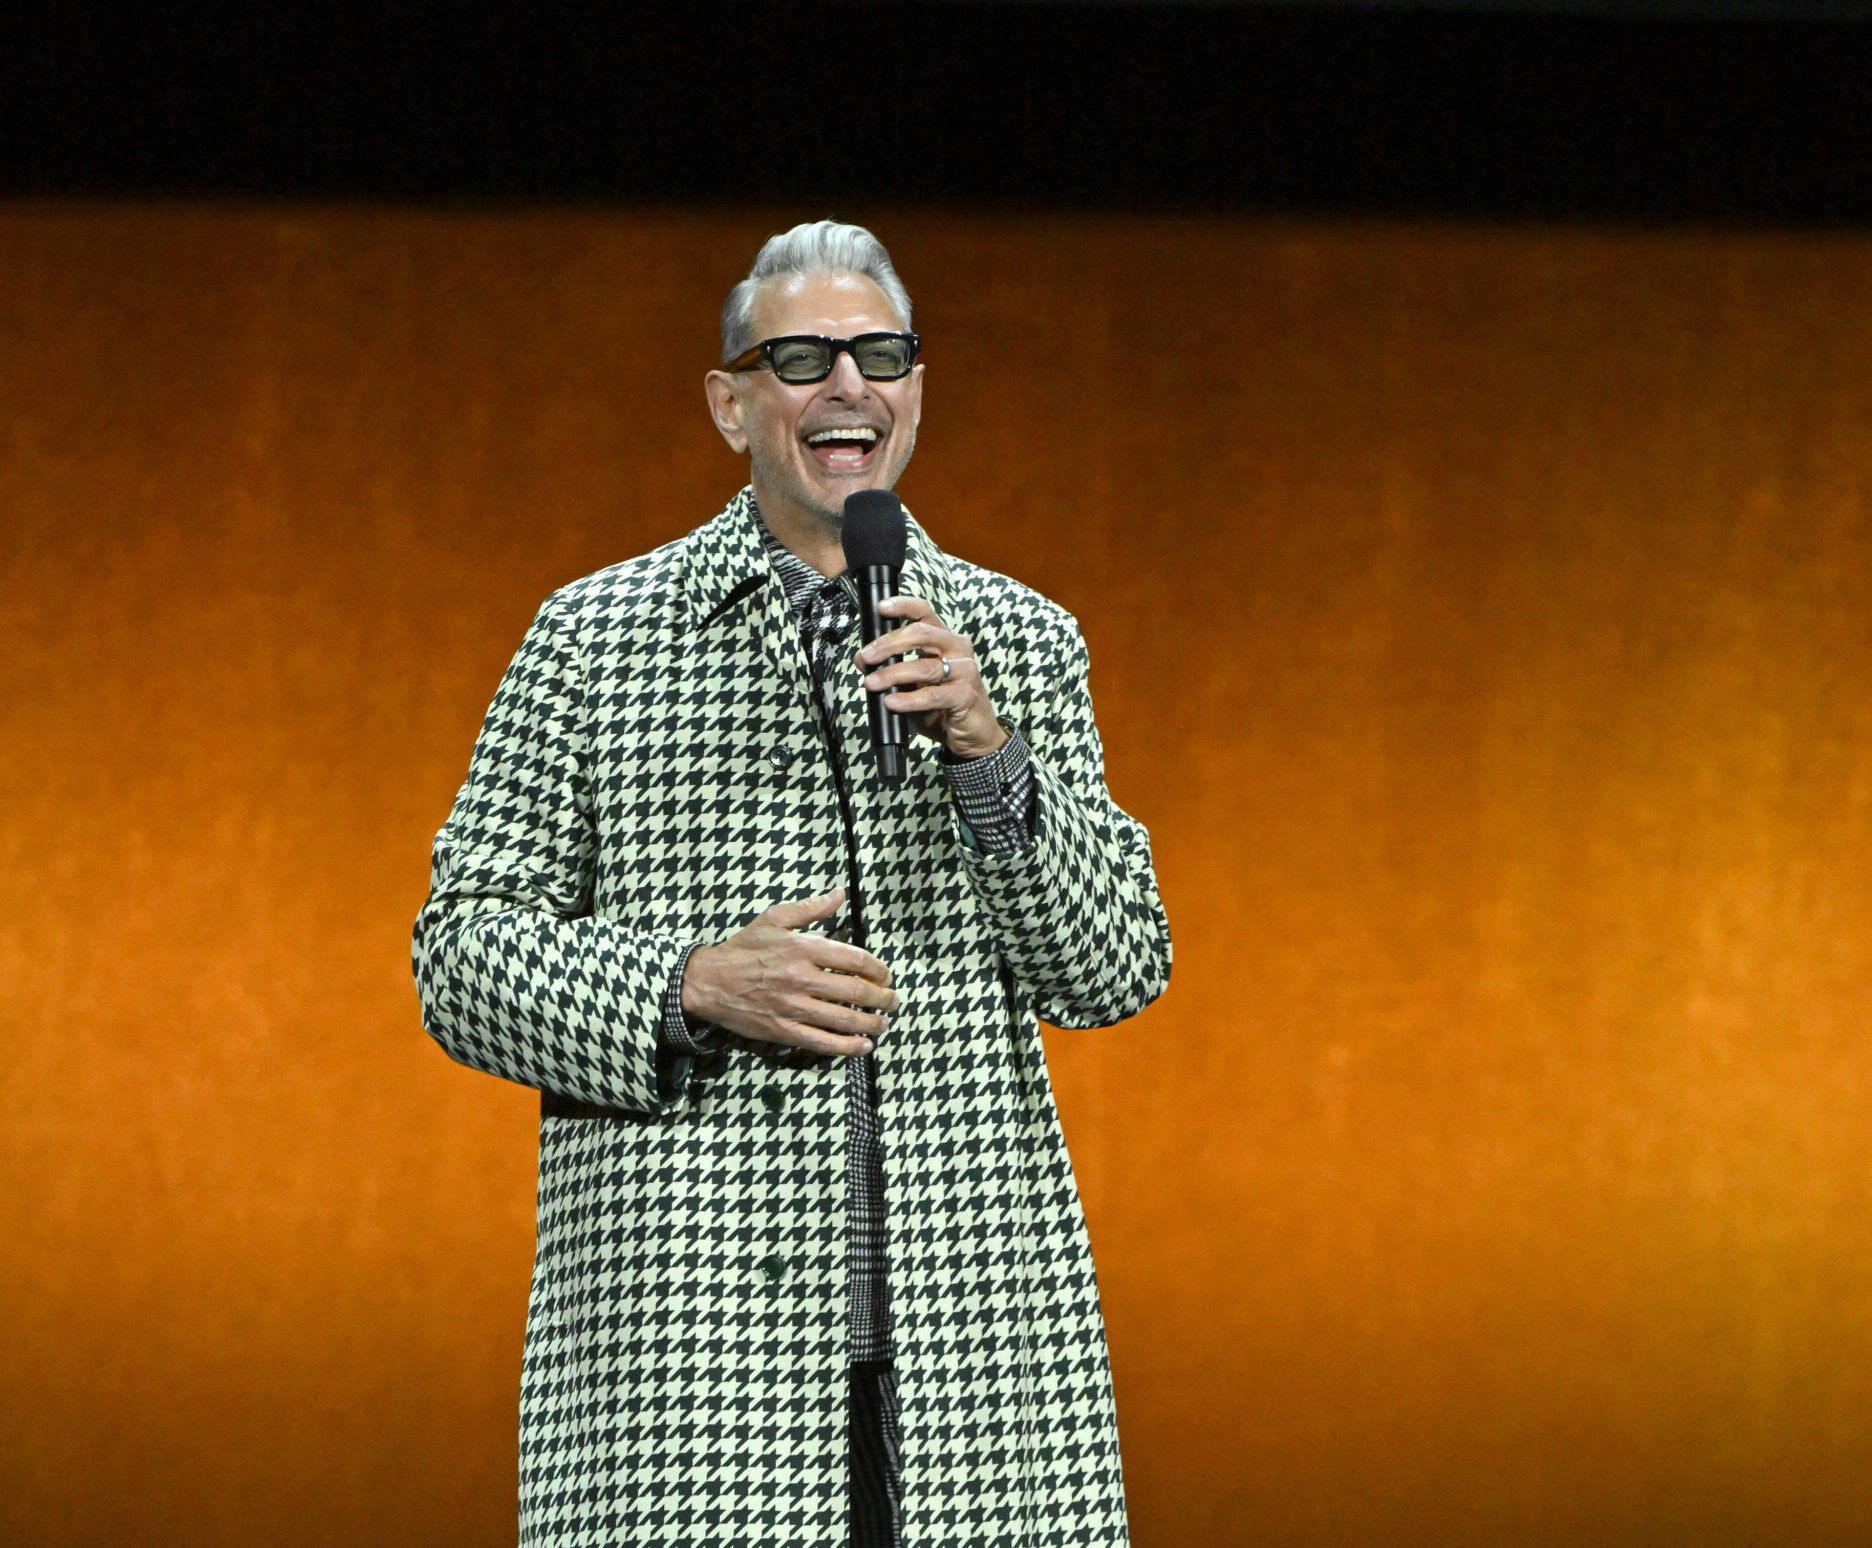 Jeff Goldblum Makes Striking Appearance in Burberry at CinemaCon